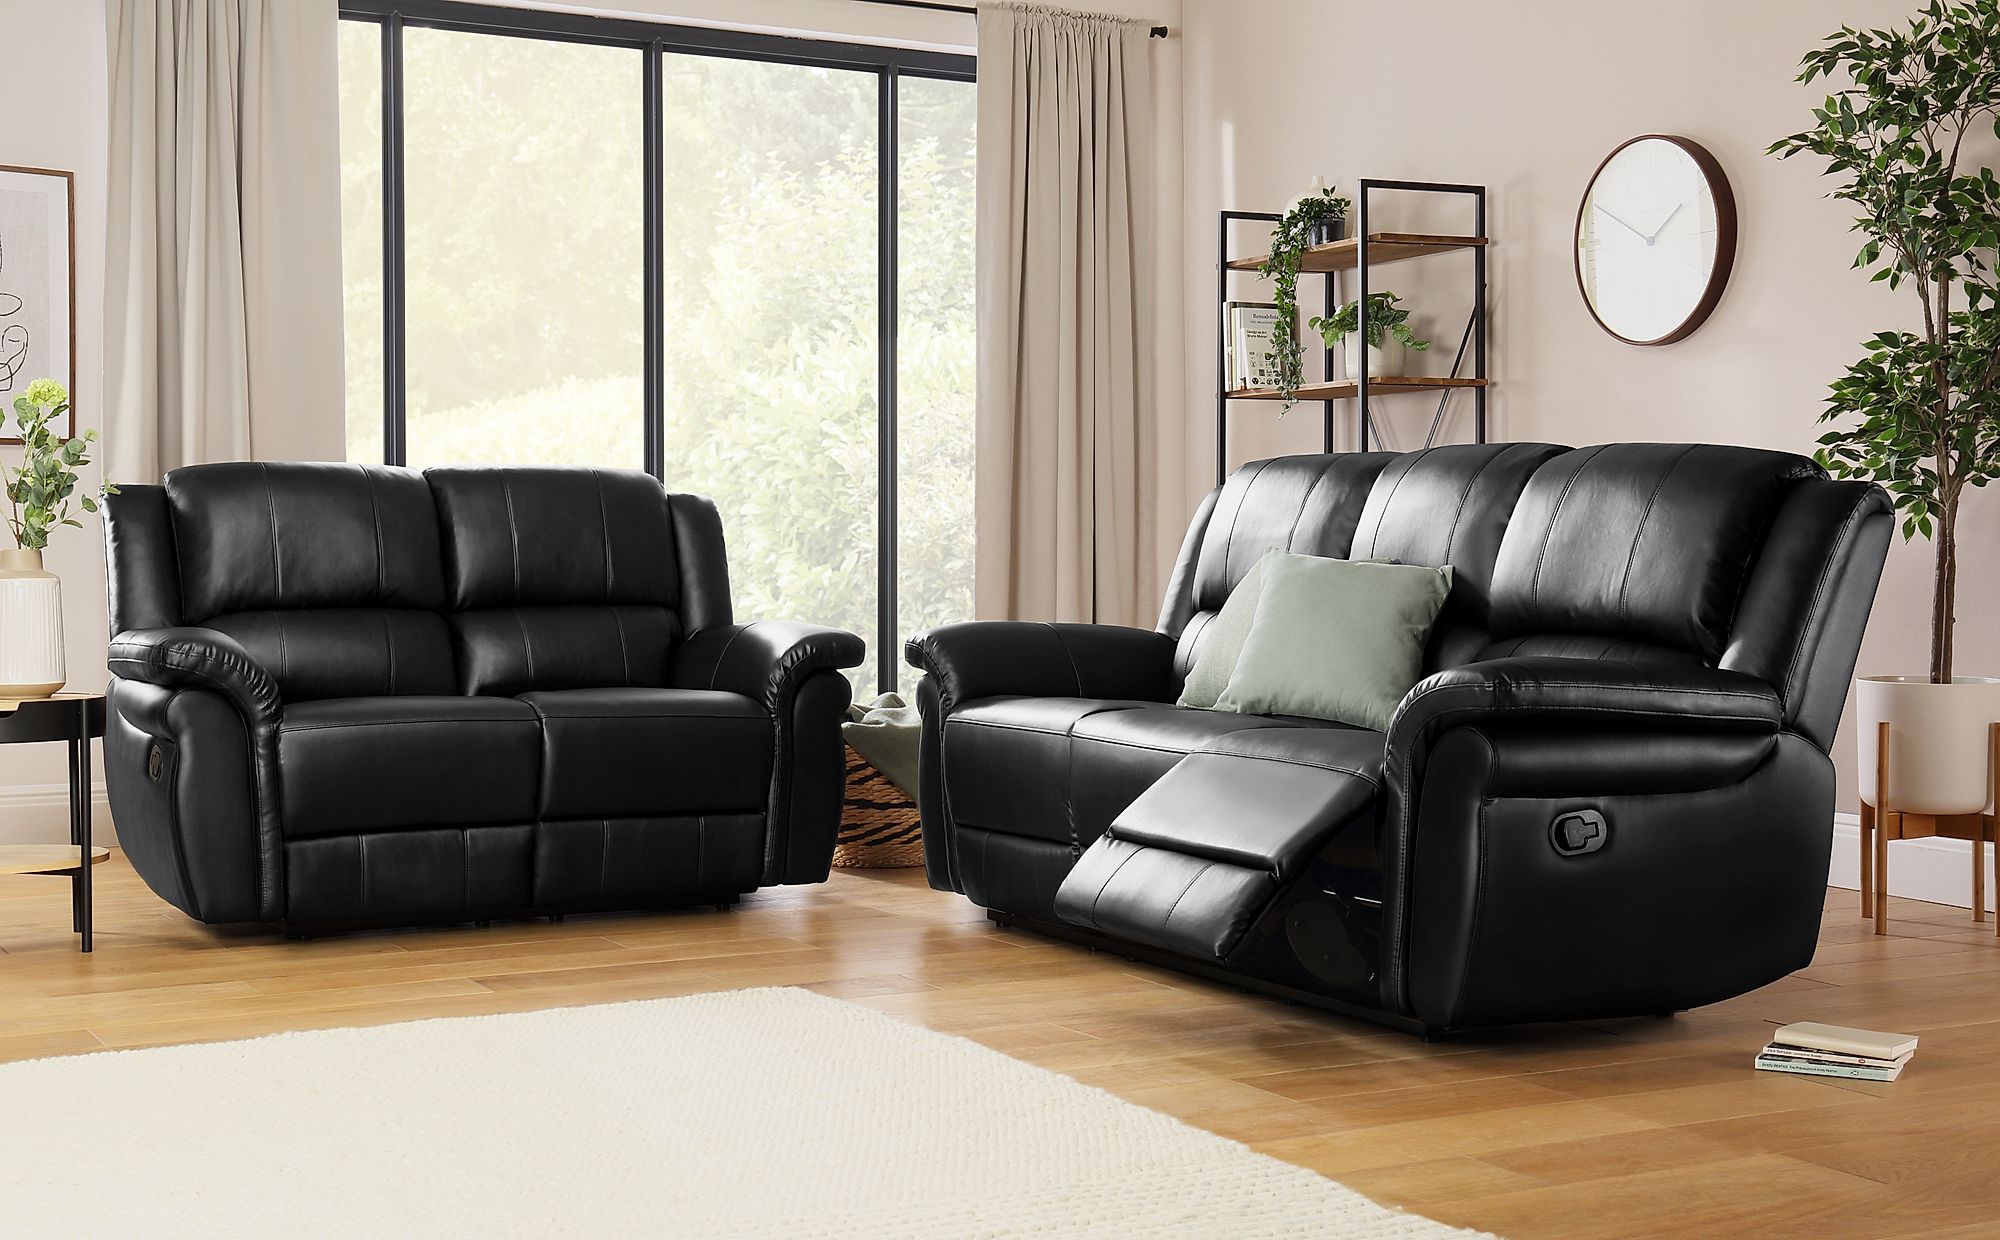 black leather sofa and recliner set